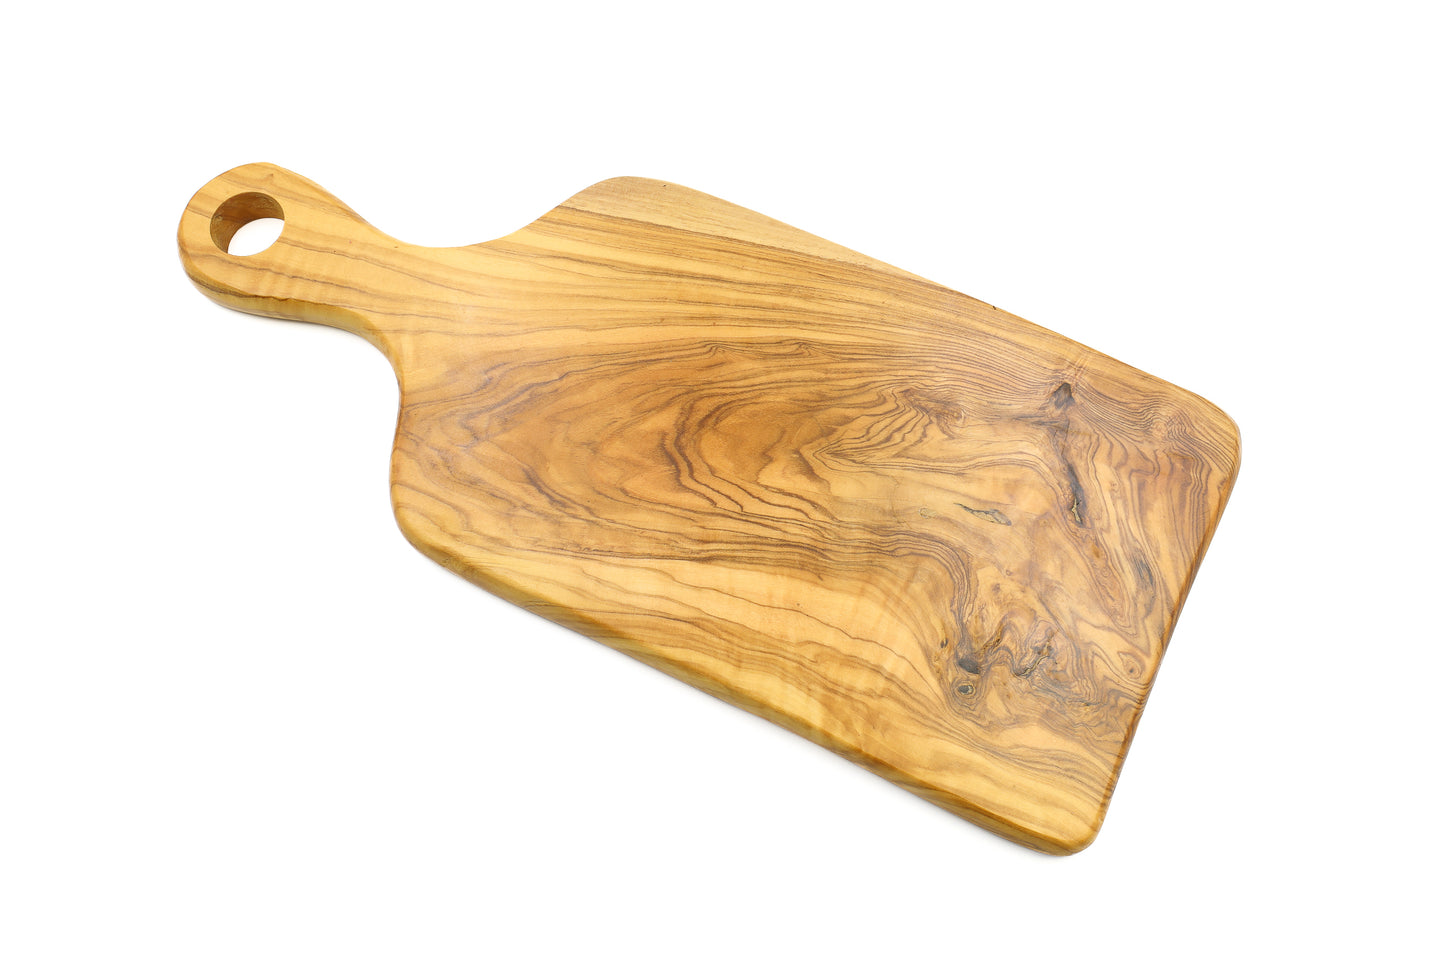 Unique olive wood kitchen accessory for slicing and chopping